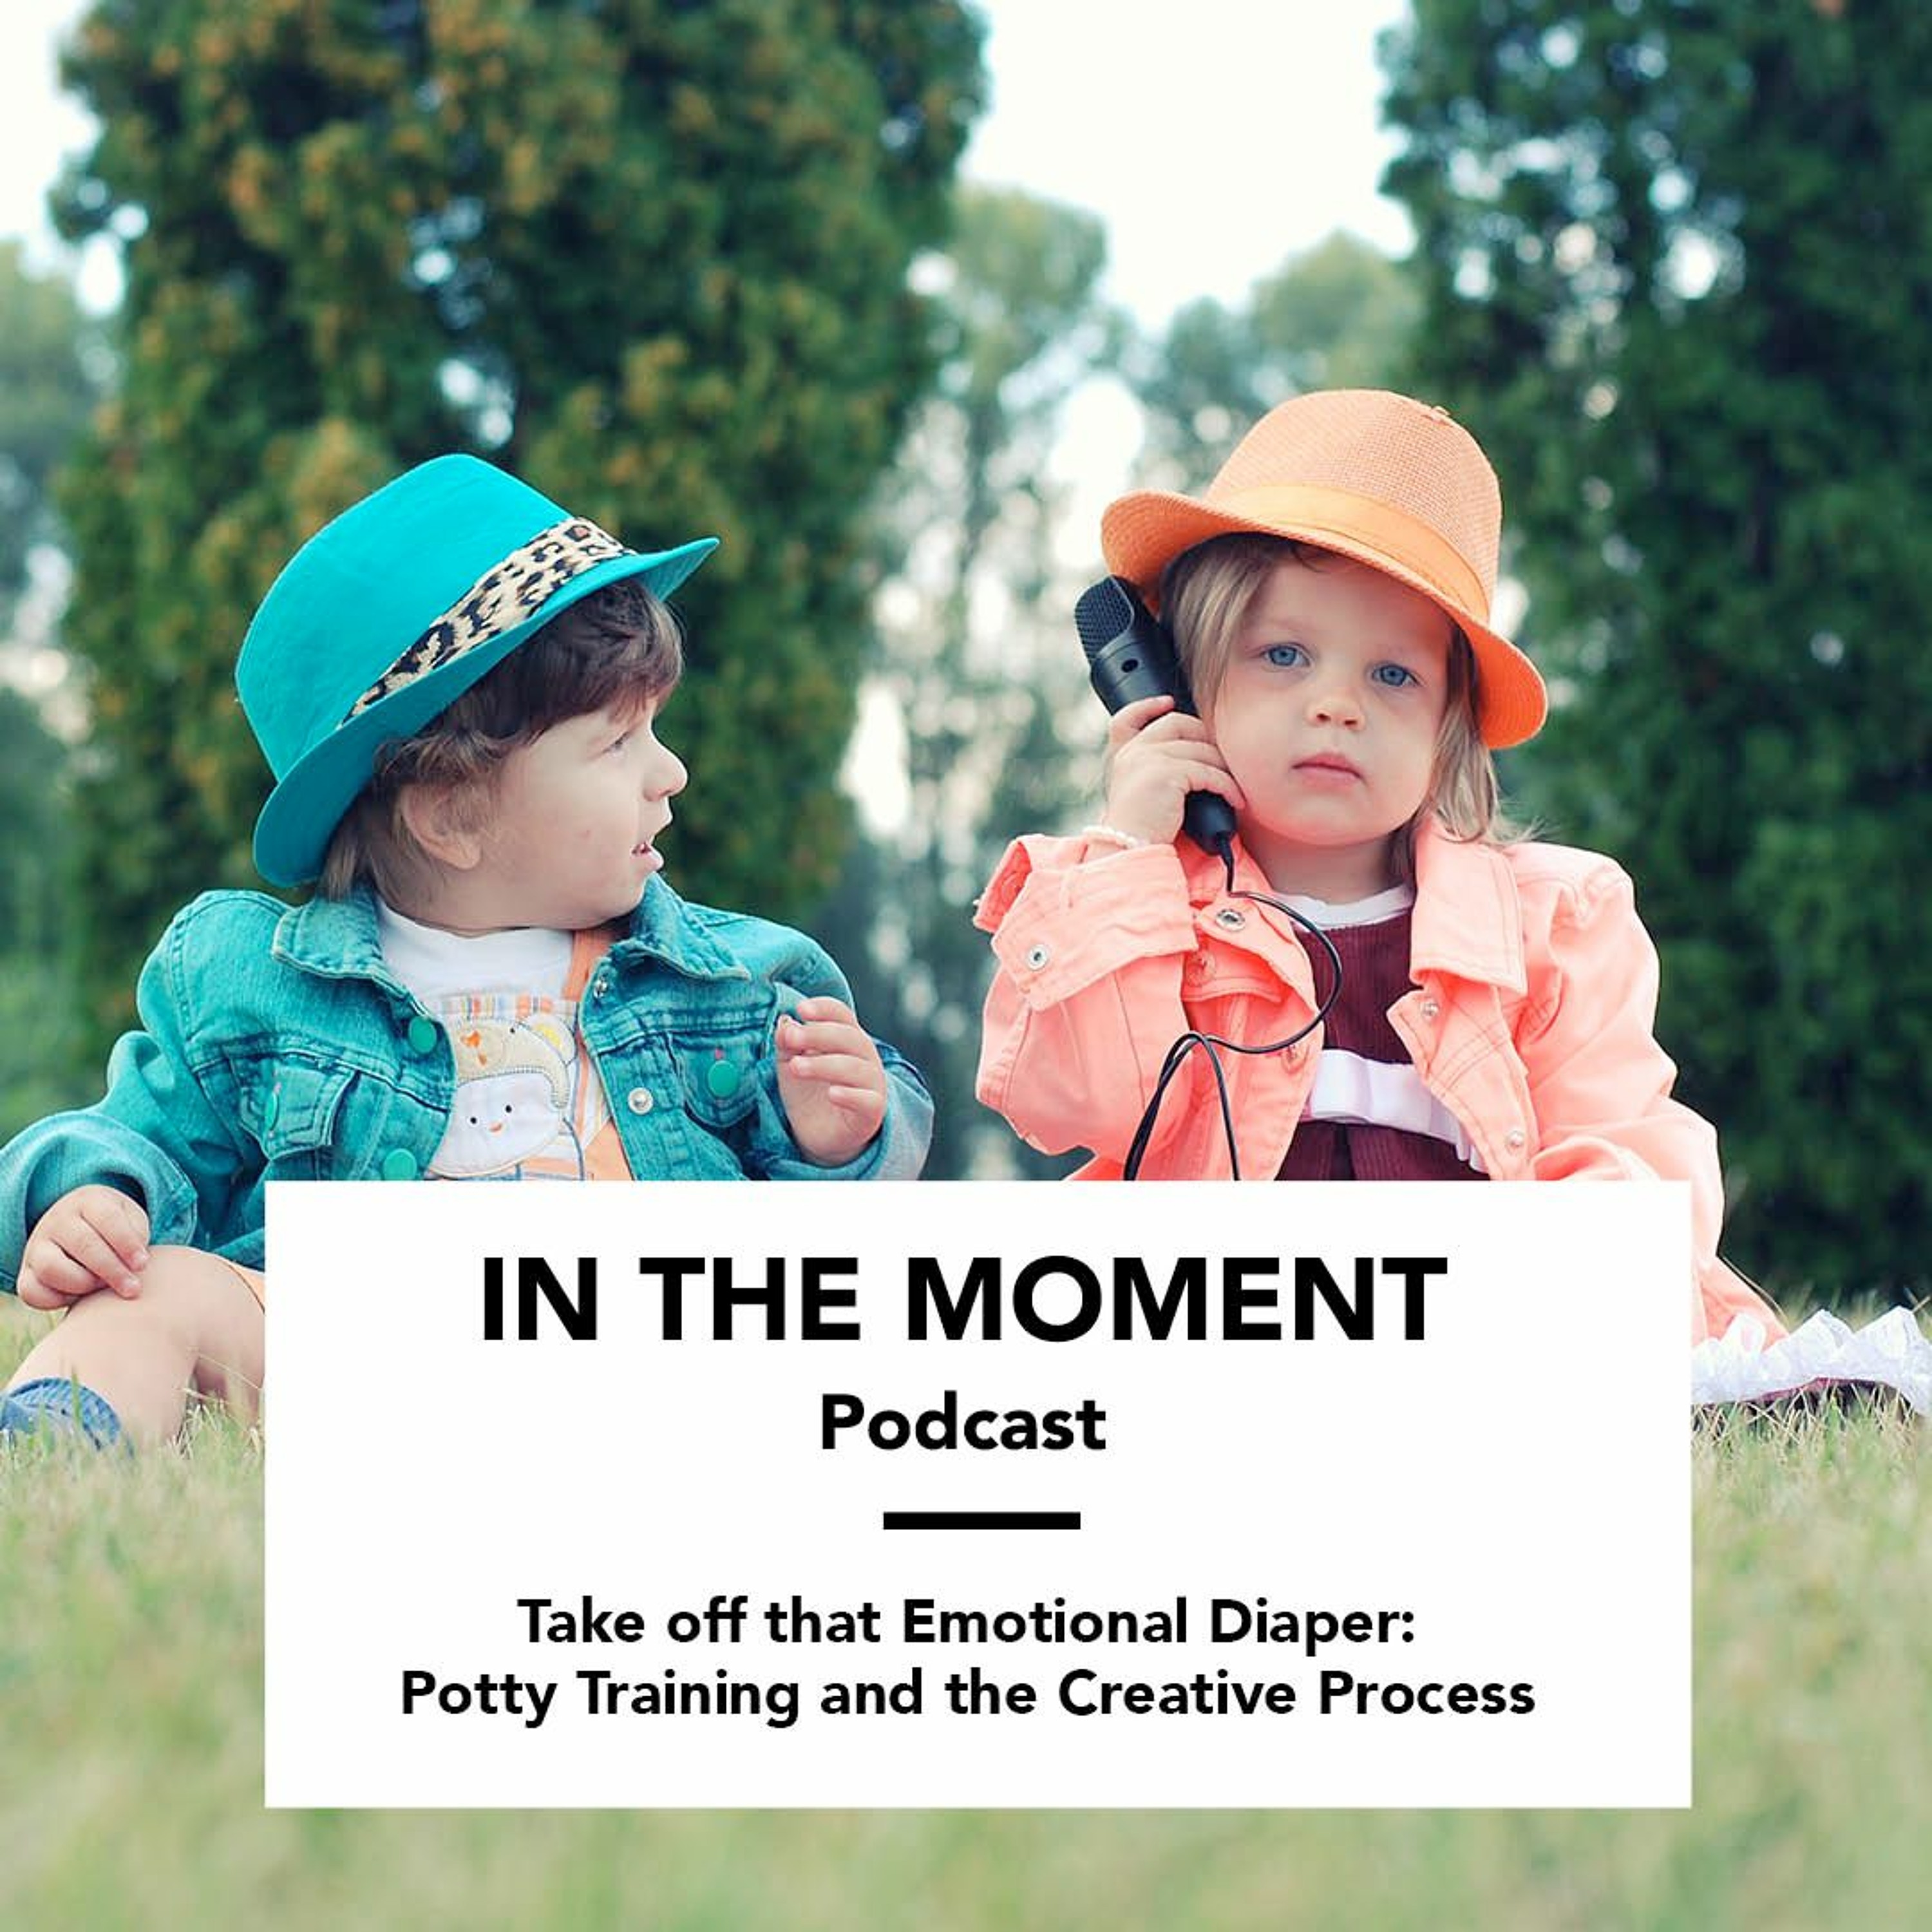 Take off that Emotional Diaper: Potty Training and the Creative Process